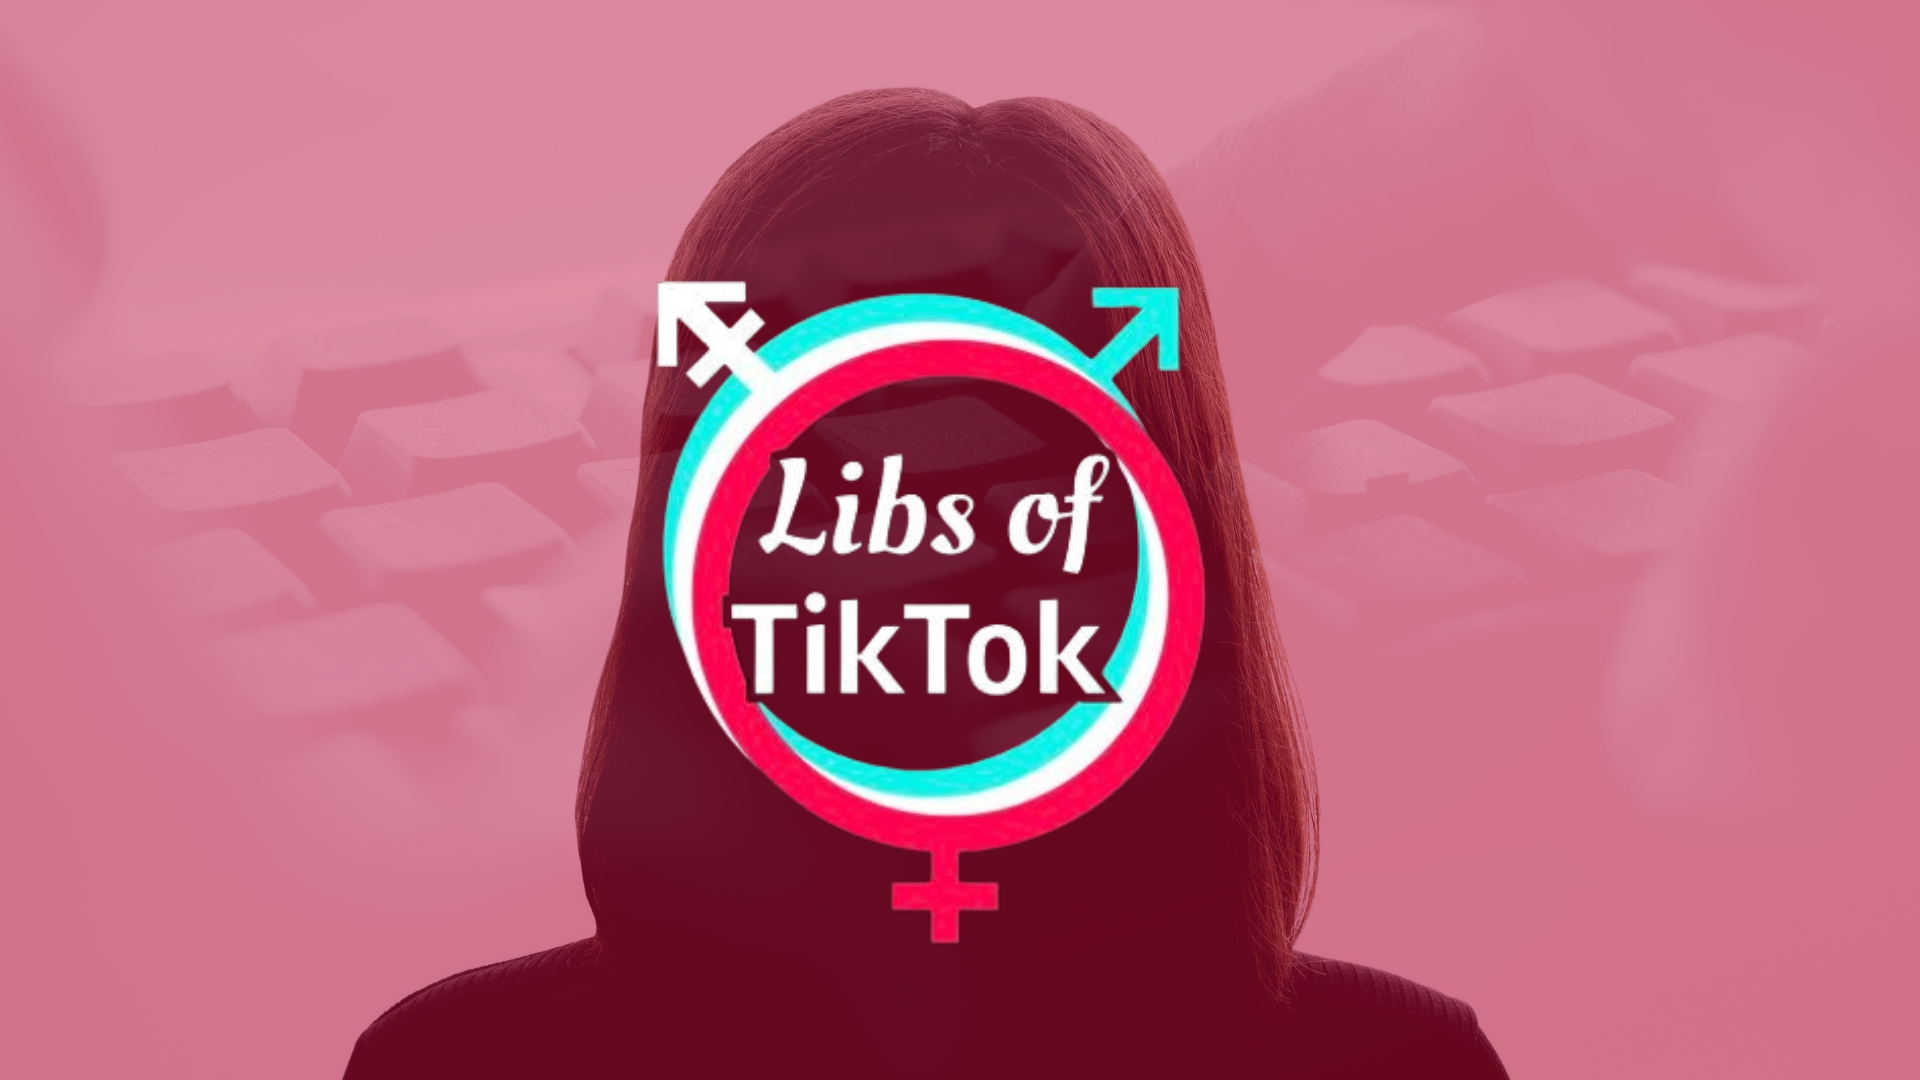 Libs of Tiktok is incredibly effective--that's why the mainstream media hates her